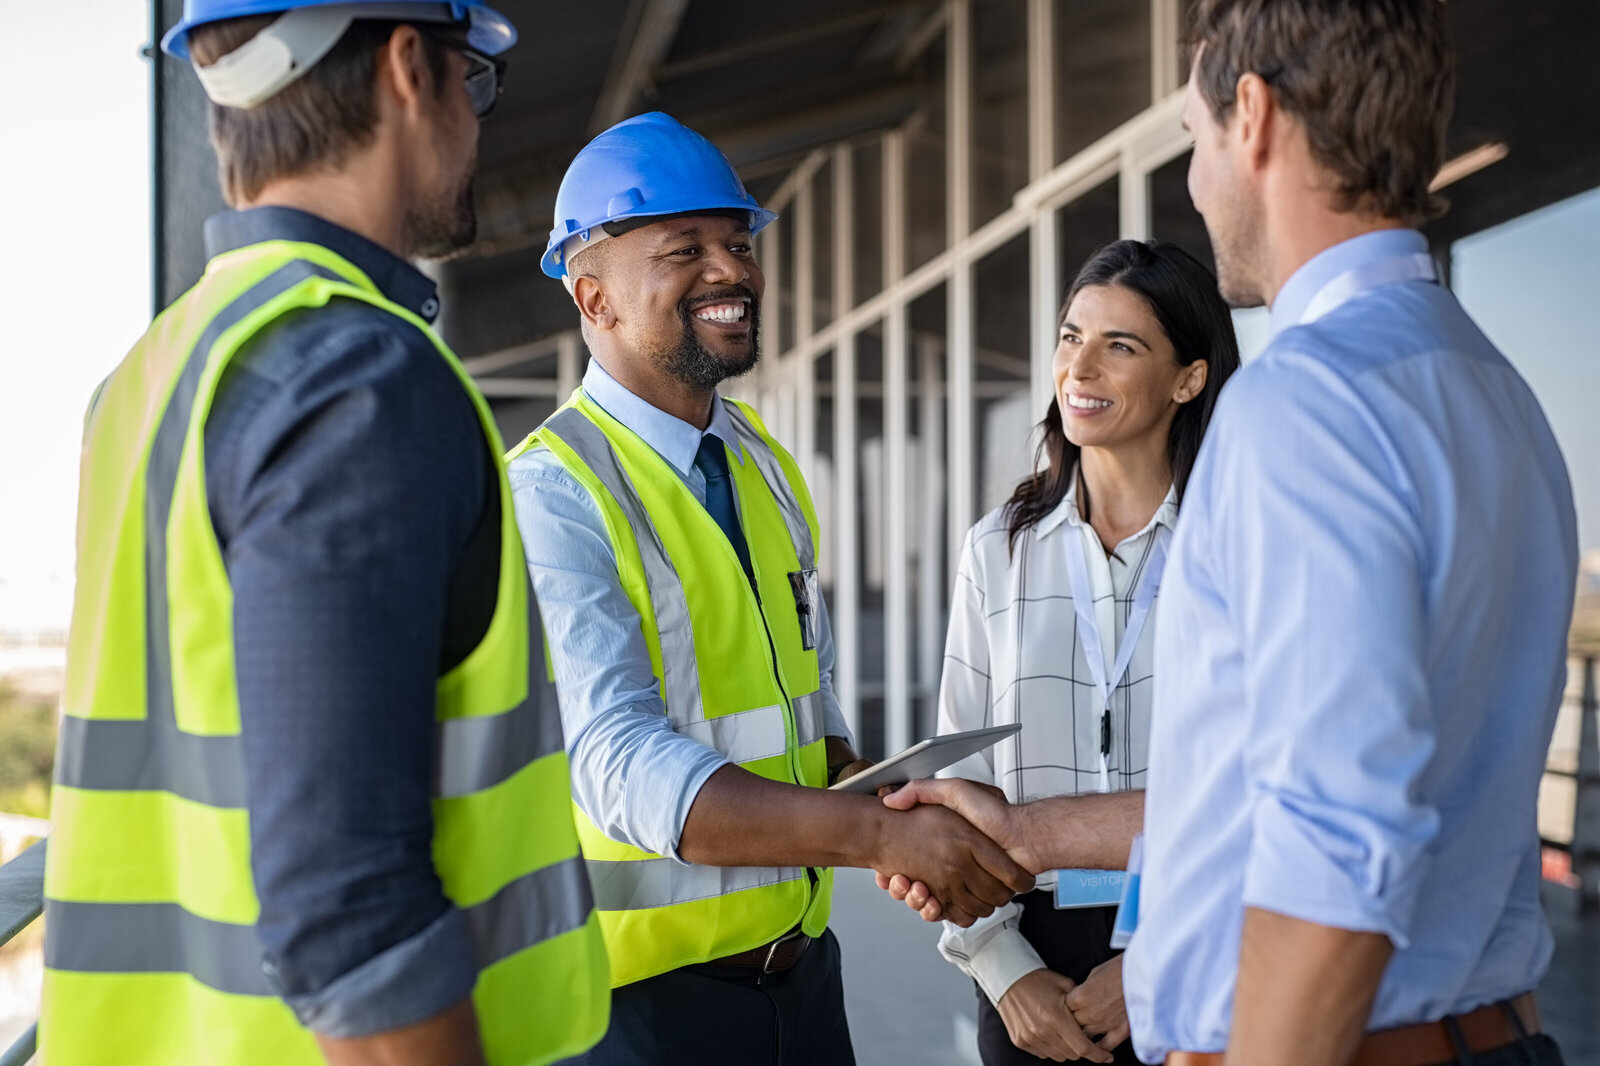 2 men shake hands at a construction site as woman smiles and looks on